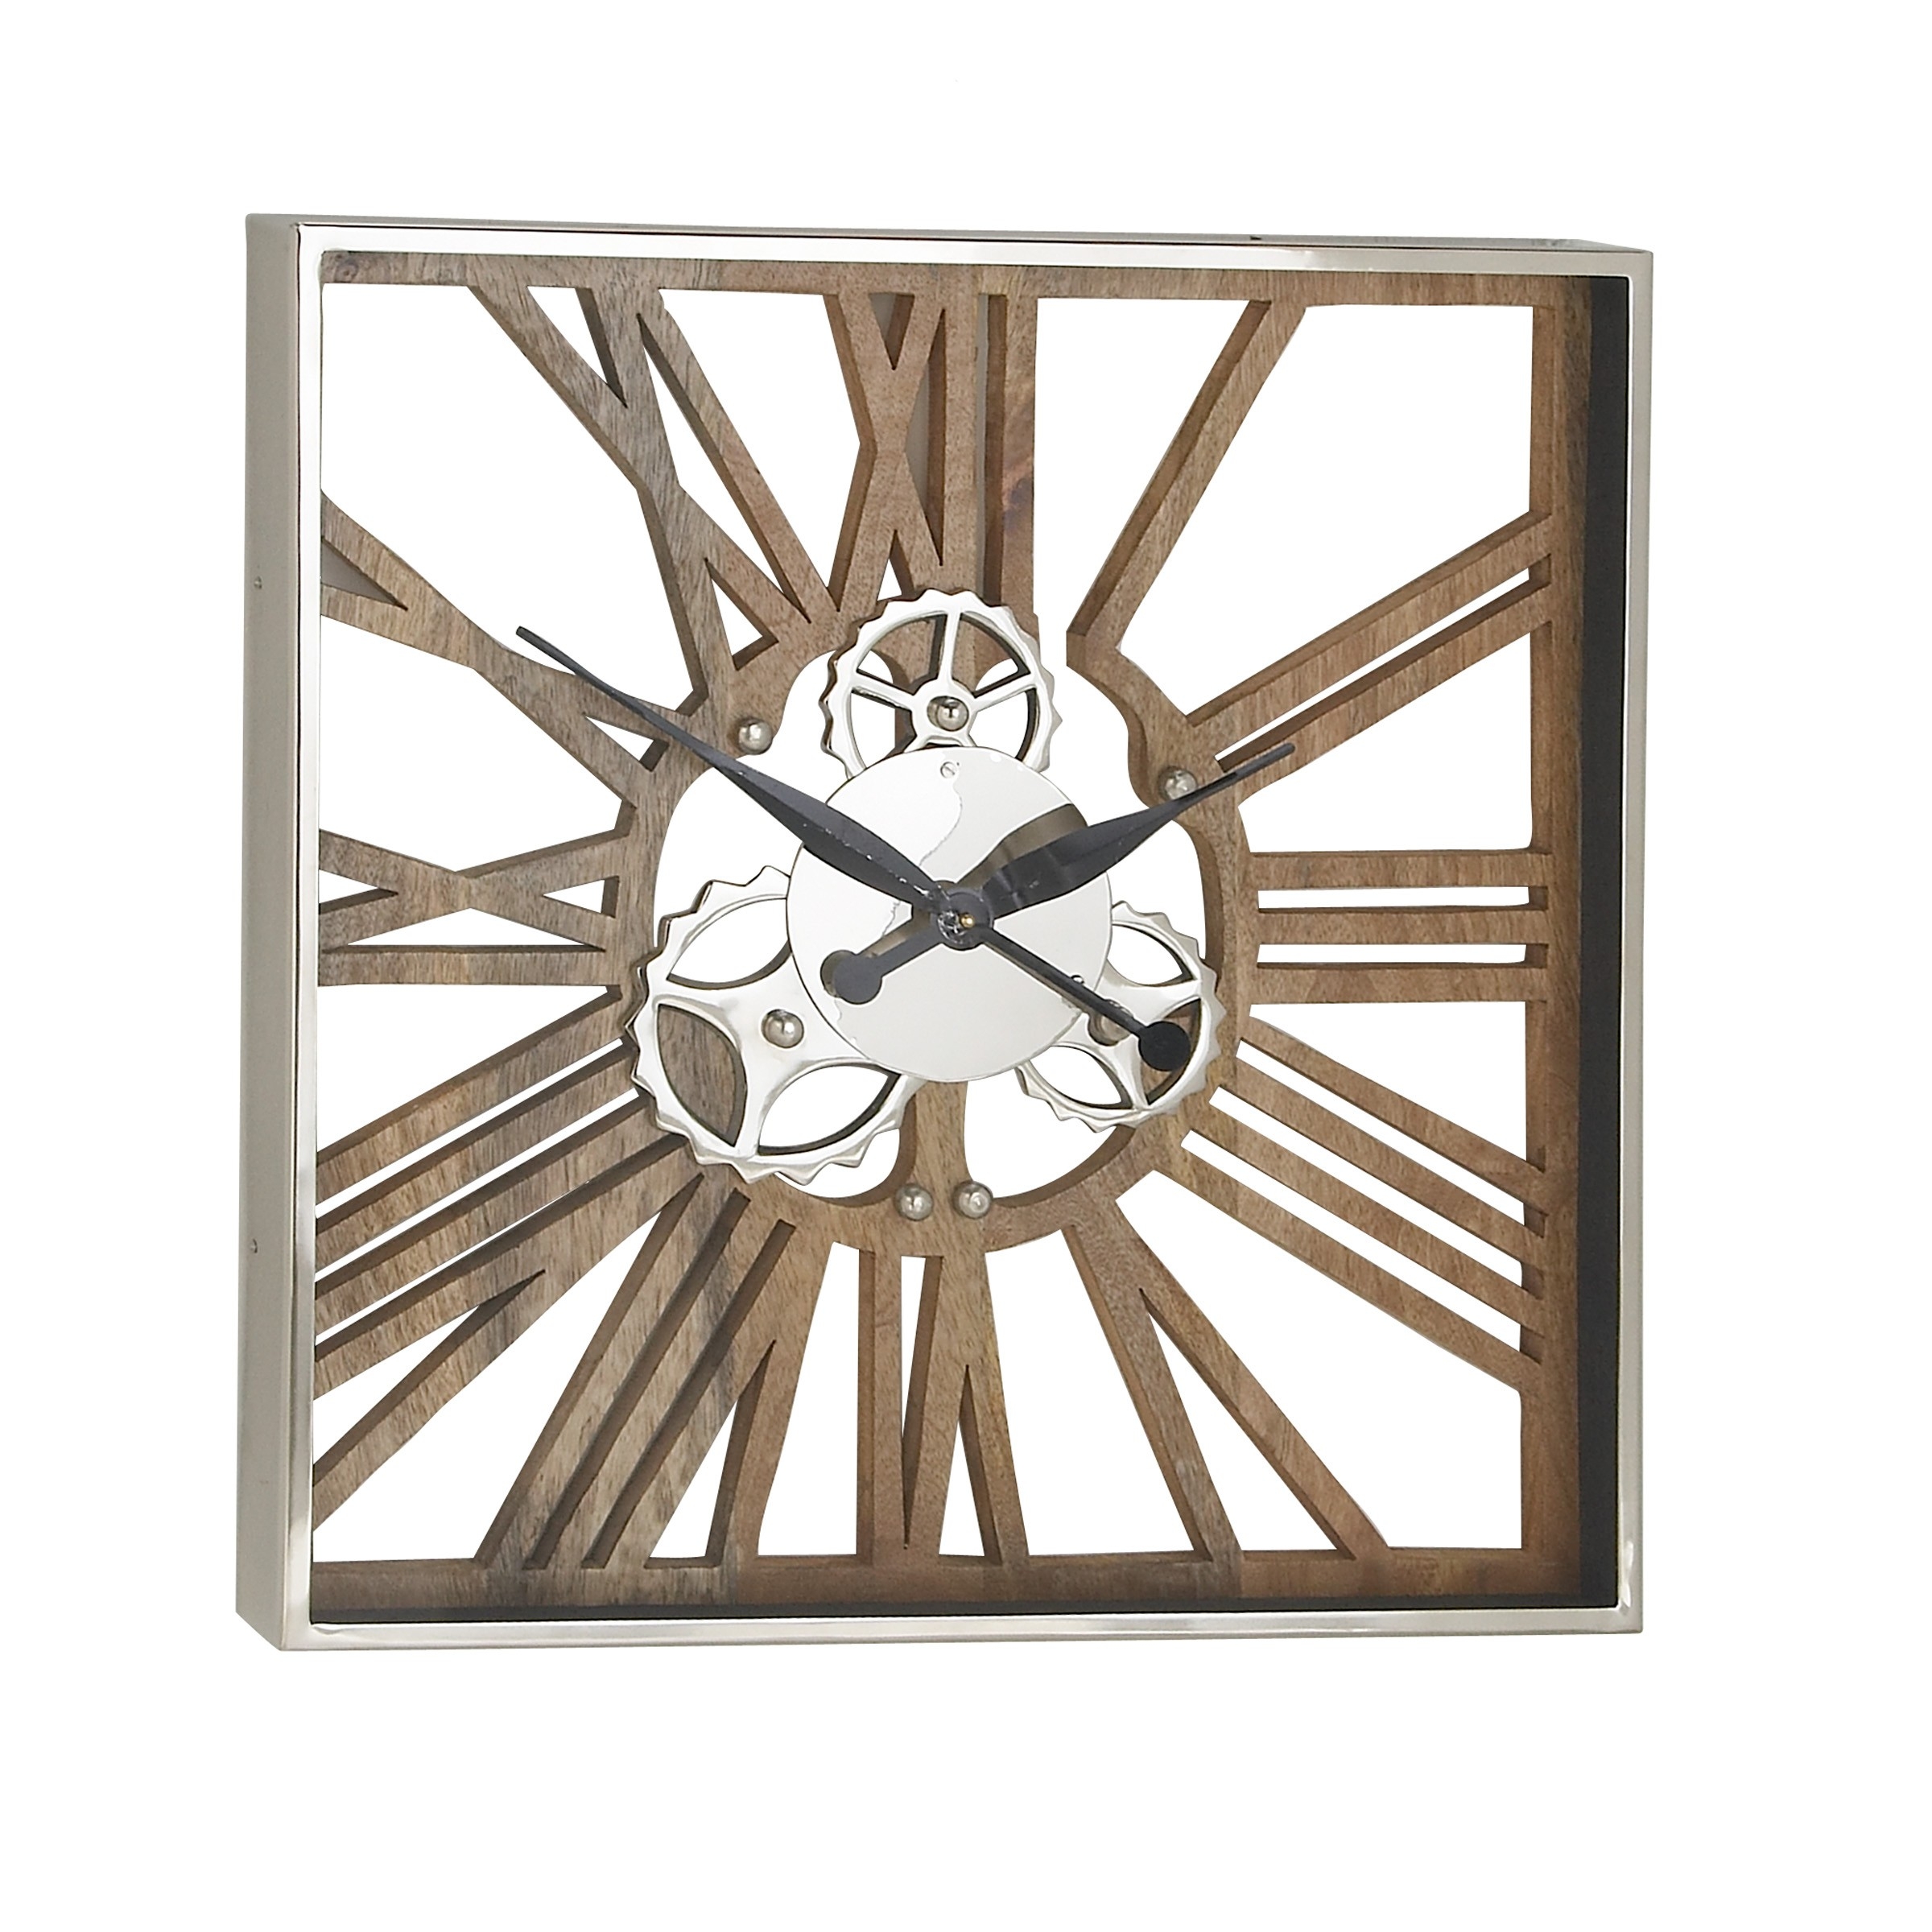 Decmode Industrial 24 X 24 Inch Square Wood, Aluminum And Stainless Steel  Gear Wall Clock  Wall Calendar Frame Plan - Item 49887